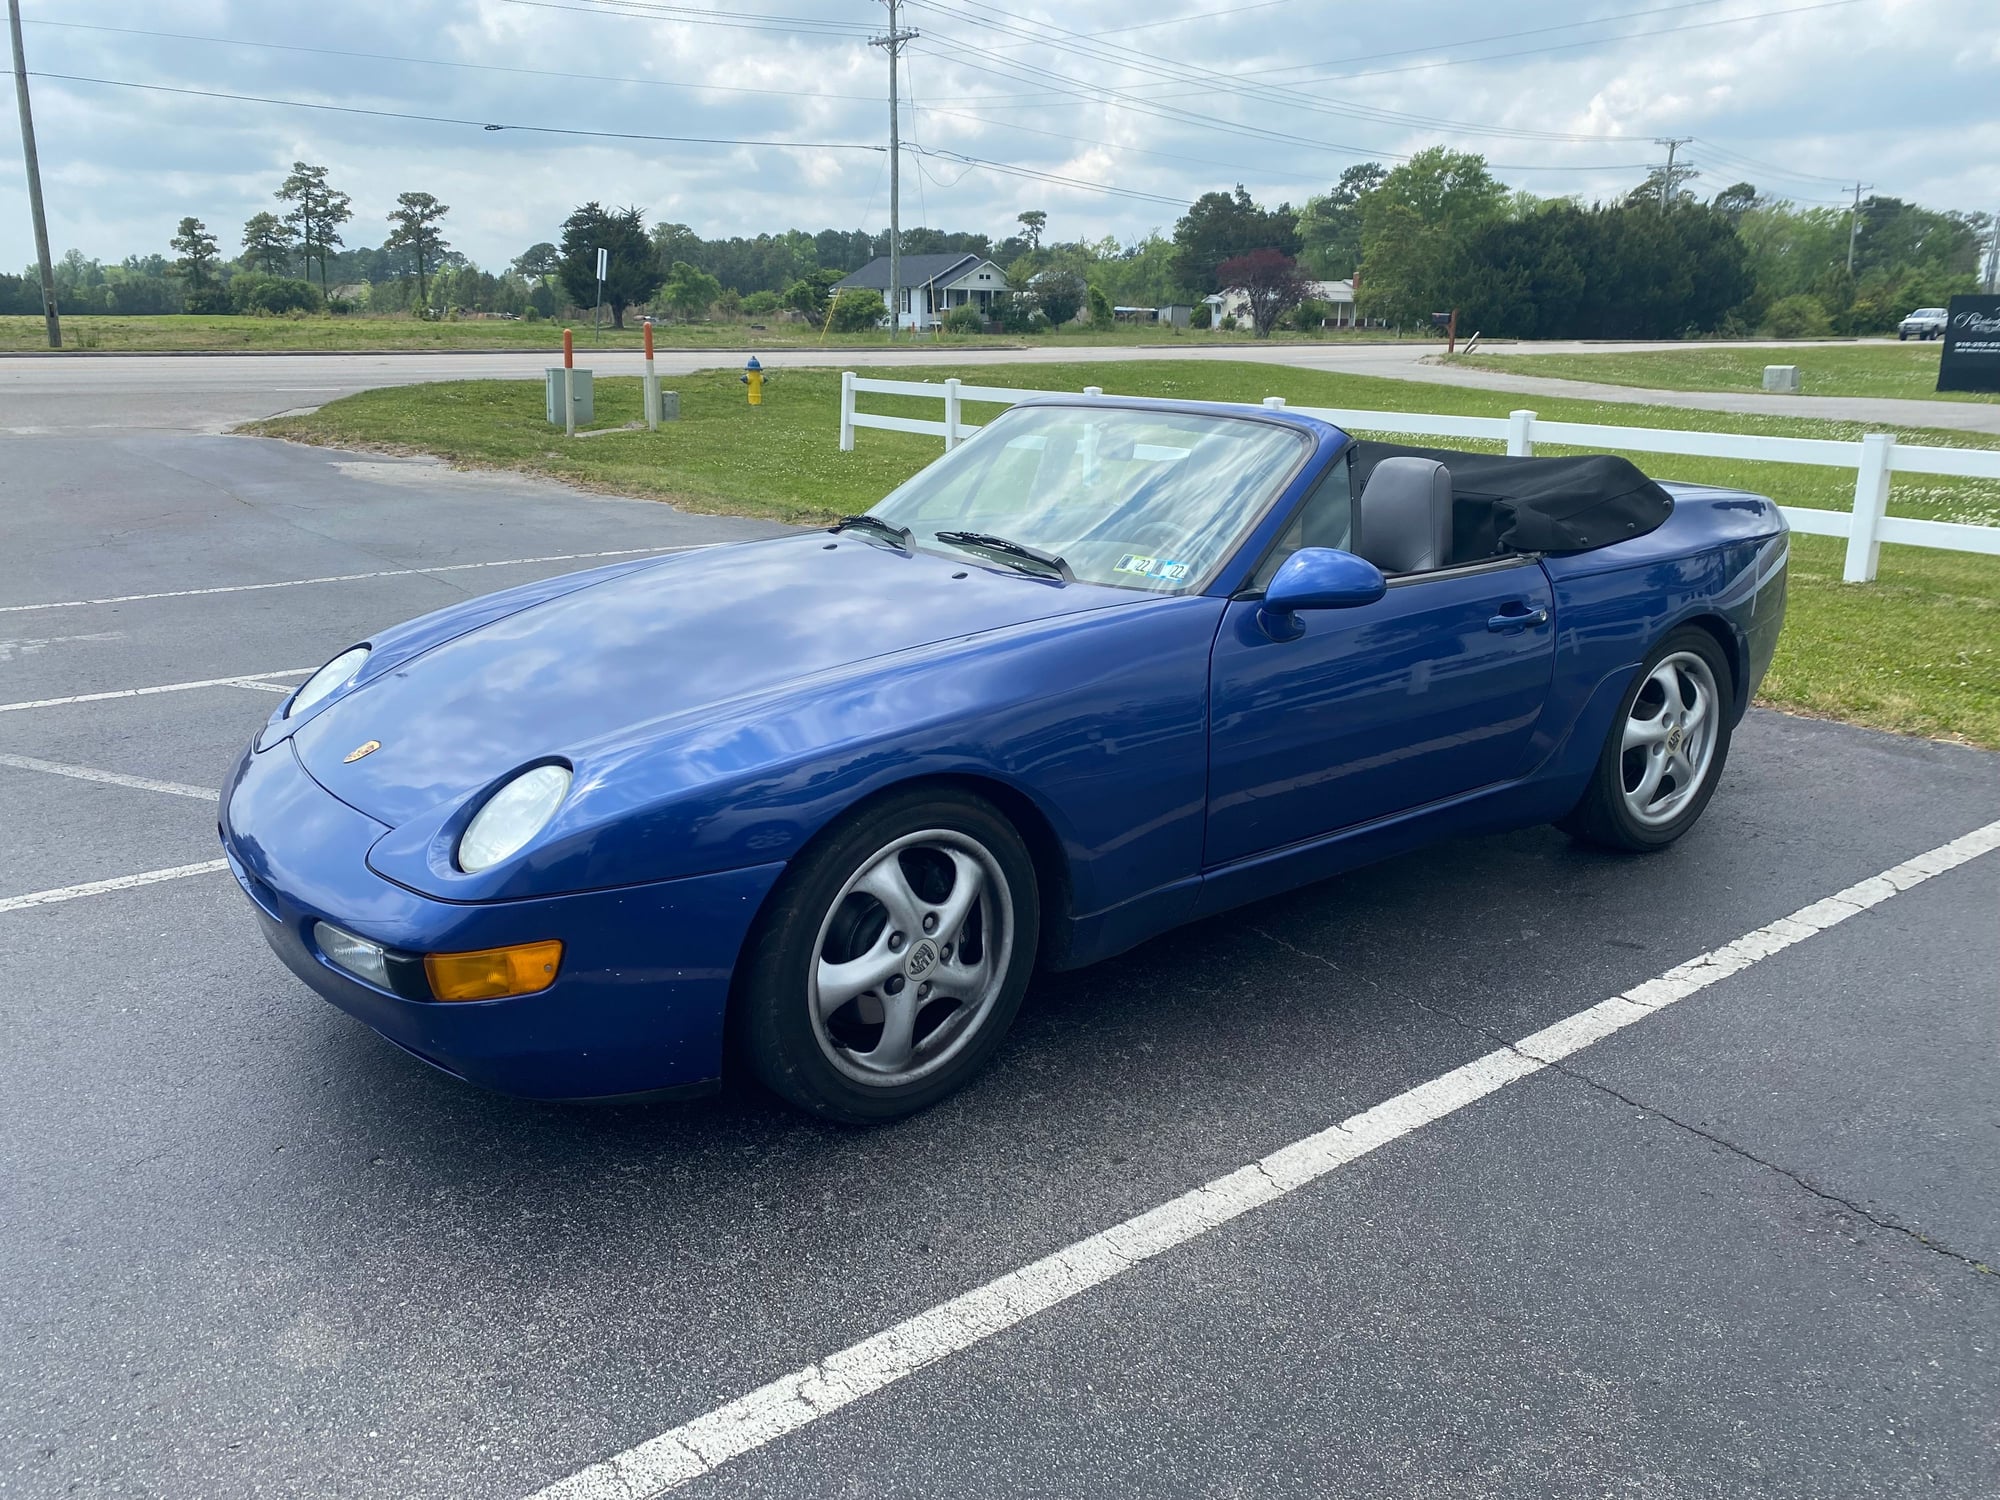 1992 Porsche 968 - 1992 Porsche 968 Convertible for sale - Used - VIN WPOCA296XNS840201 - 81,000 Miles - 4 cyl - 2WD - Manual - Convertible - Blue - Hubert, NC 28539, United States